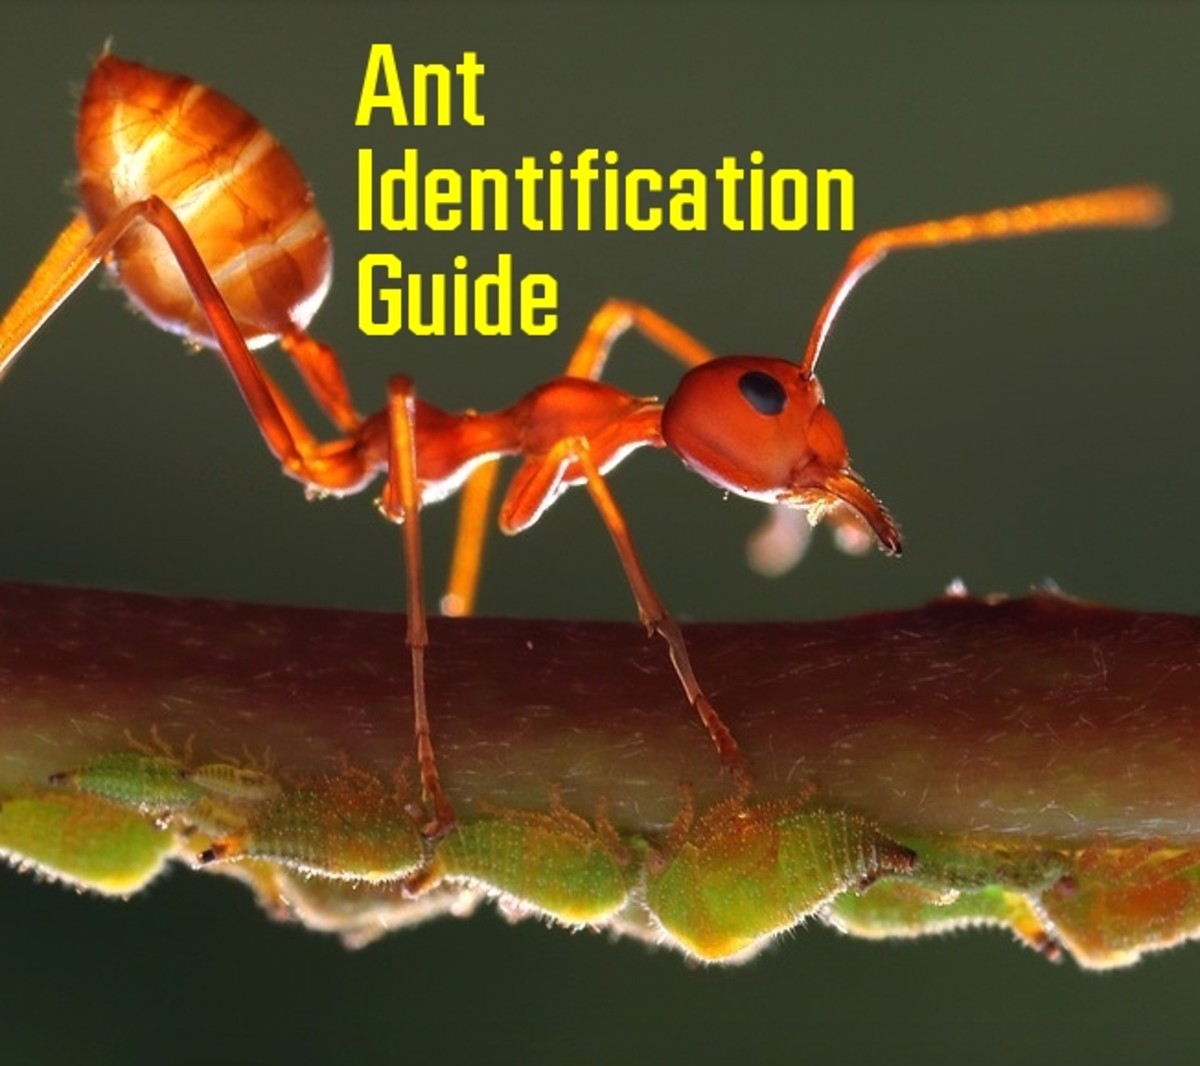 Ants are fascinating insects.